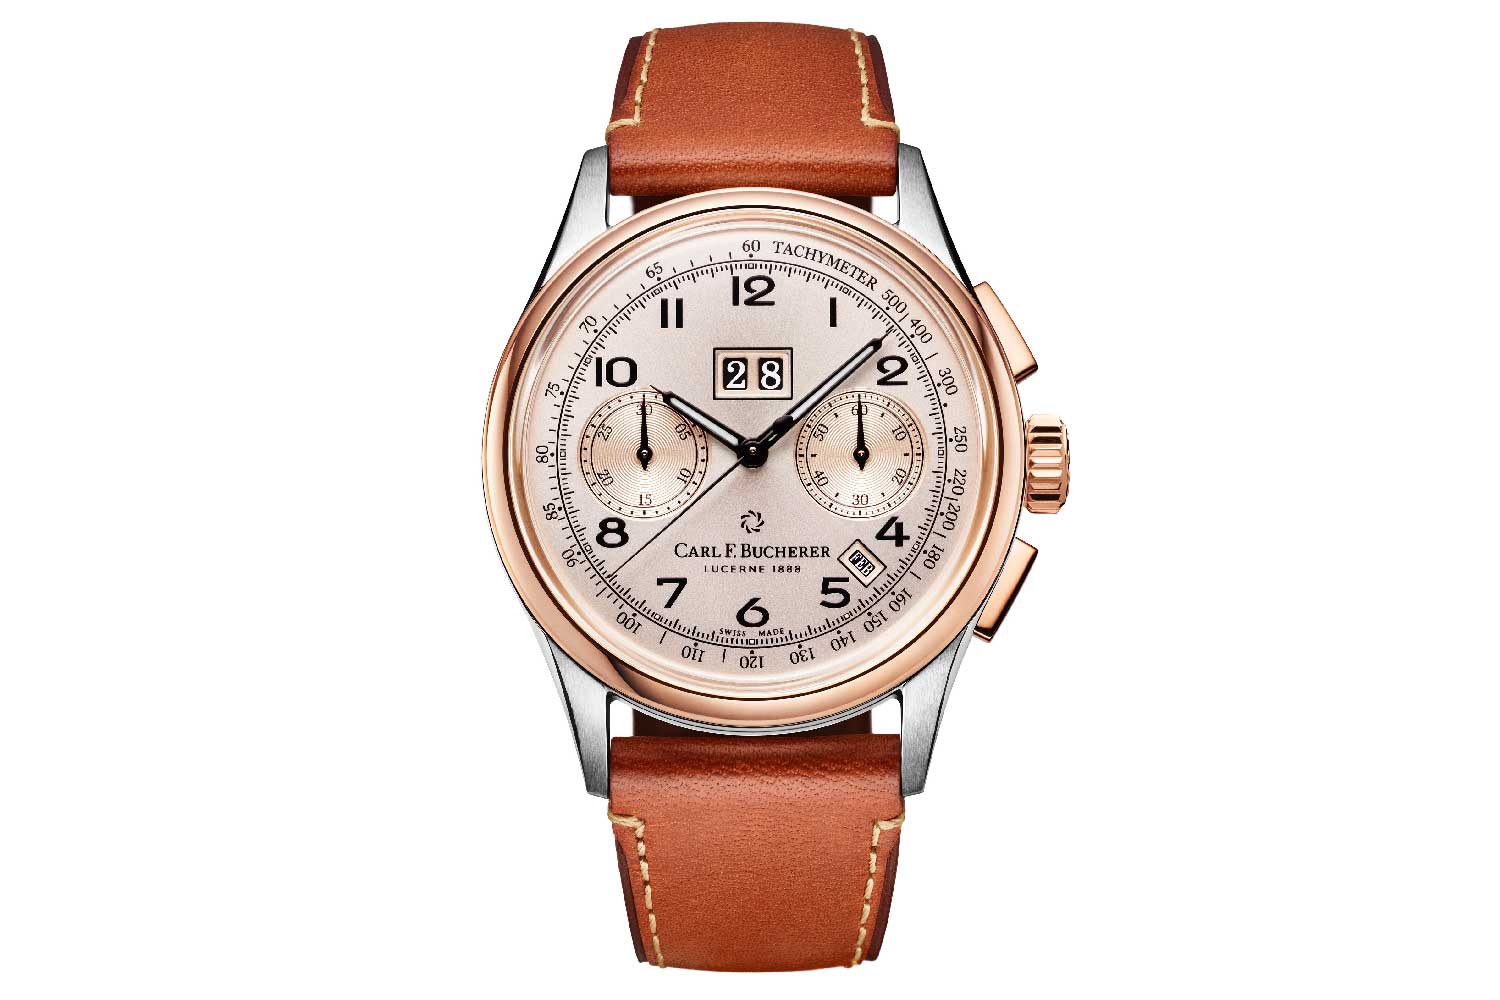 Introduced in 2019, this bi-colour Heritage BiCompax Annual features a rose-and-champagne-coloured dial, reminiscent of the 1956 timepiece that inspired the watch.